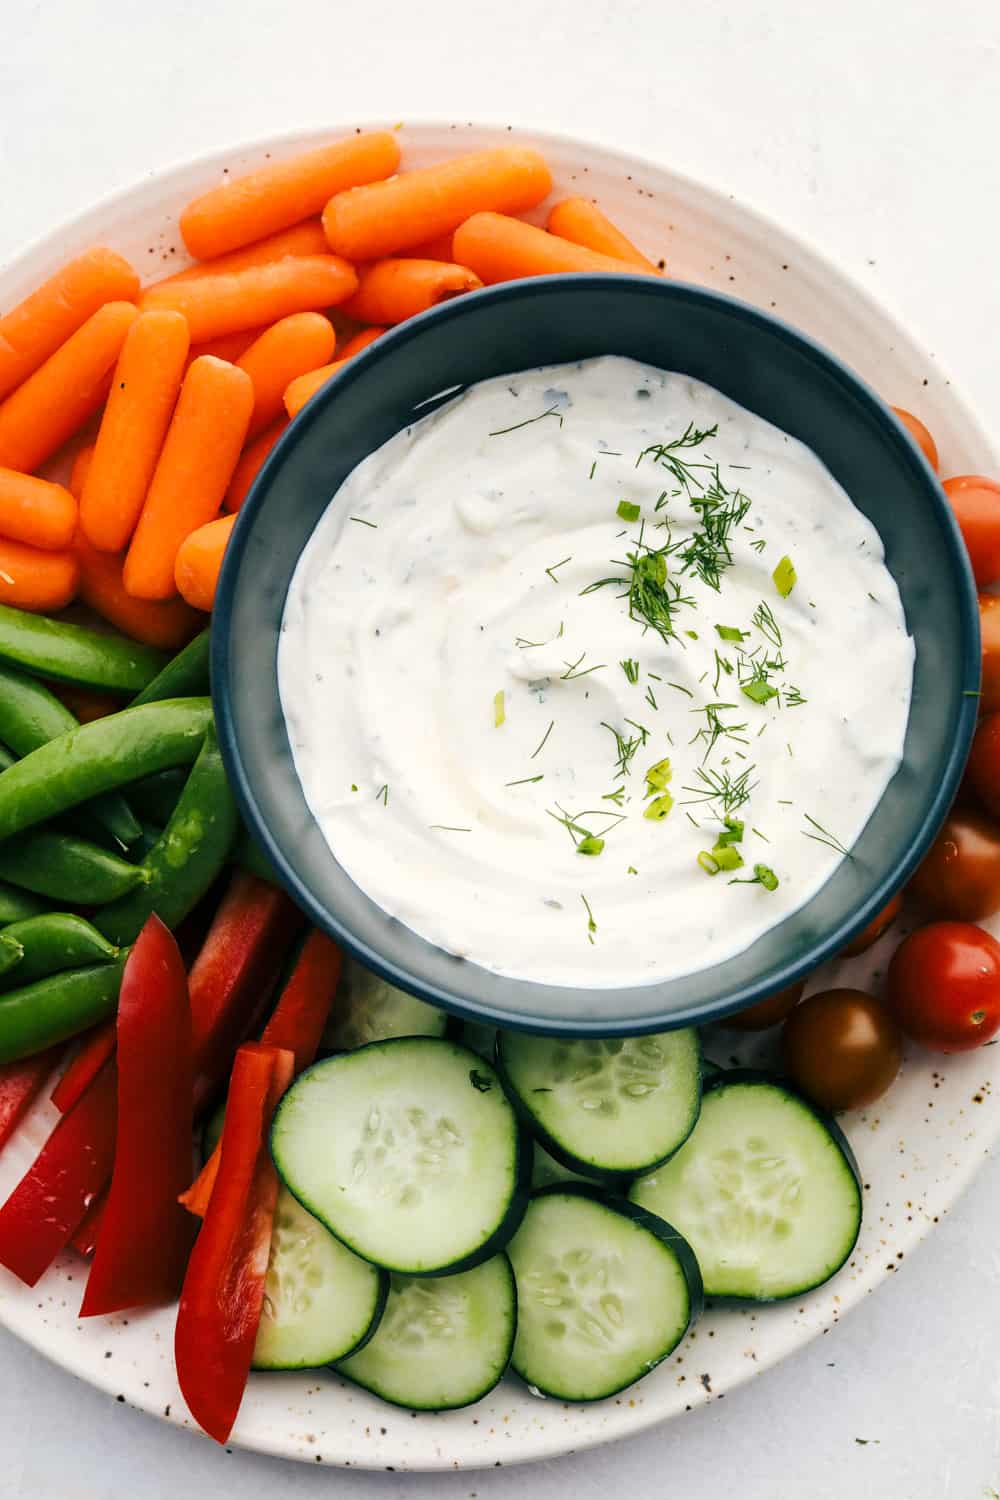 Vegetables with dip on a plate. 